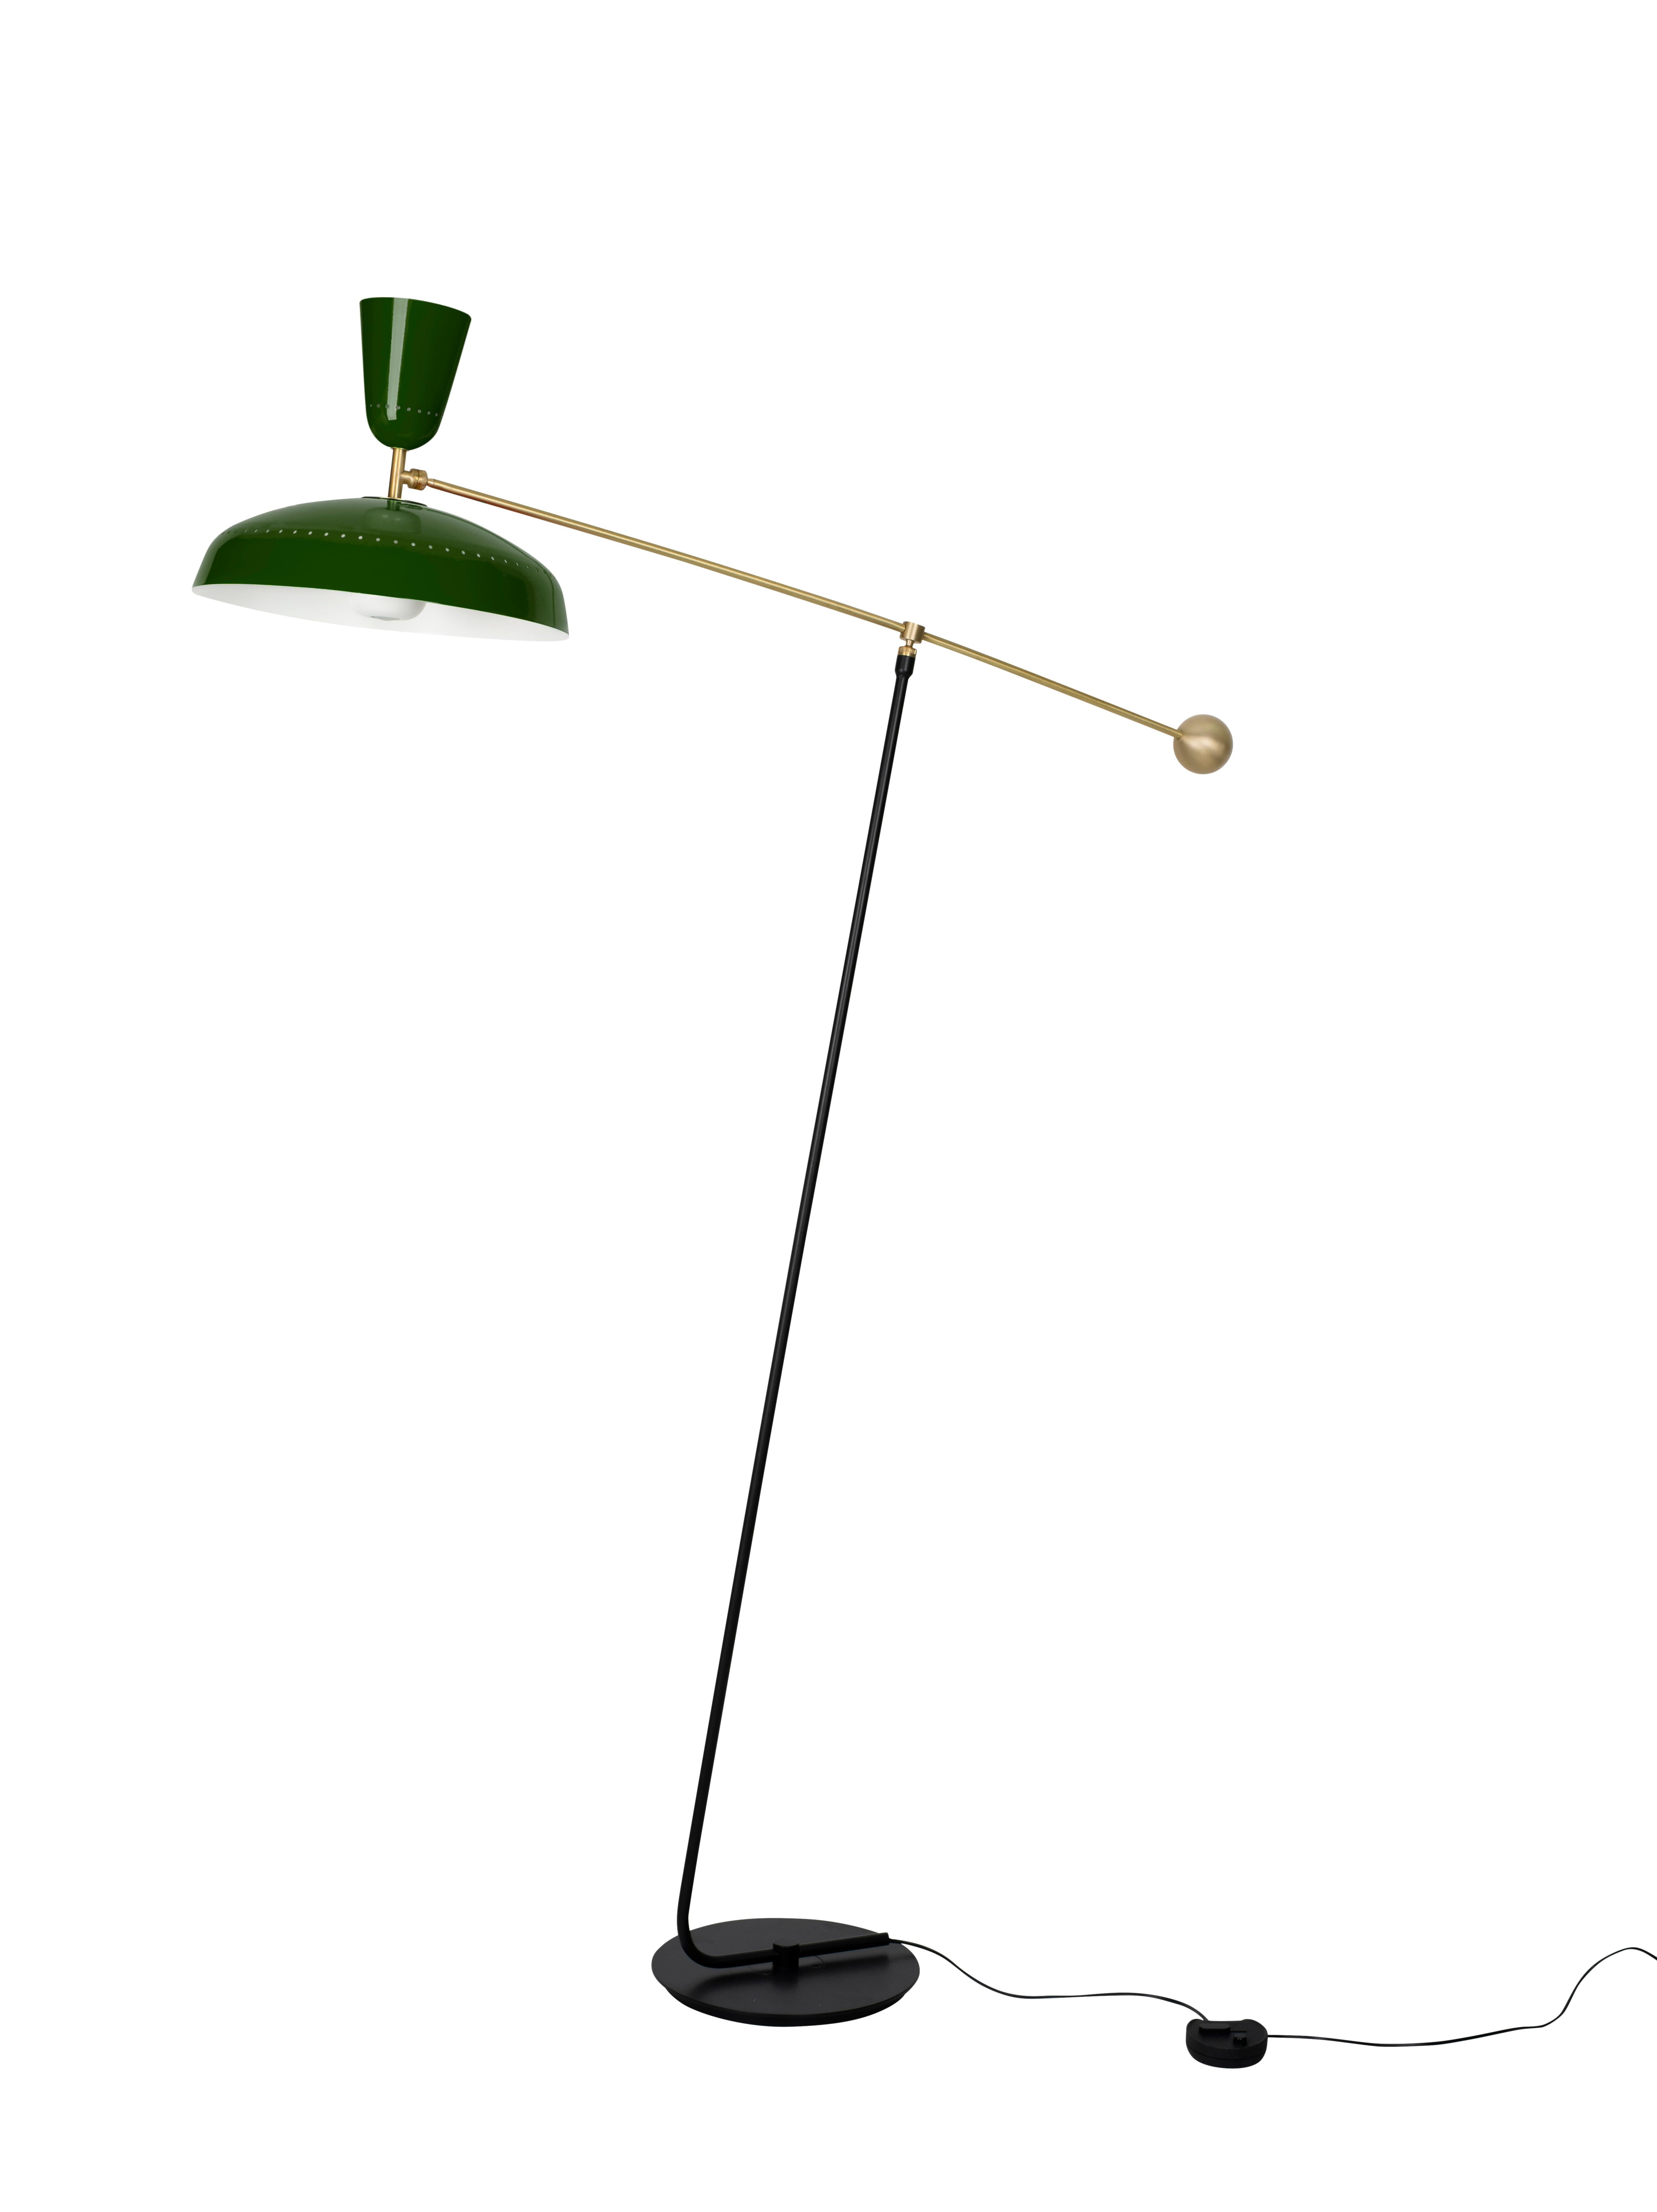 Large Pierre Guariche 'G1' Floor Lamp for Sammode Studio in Black For Sale 8